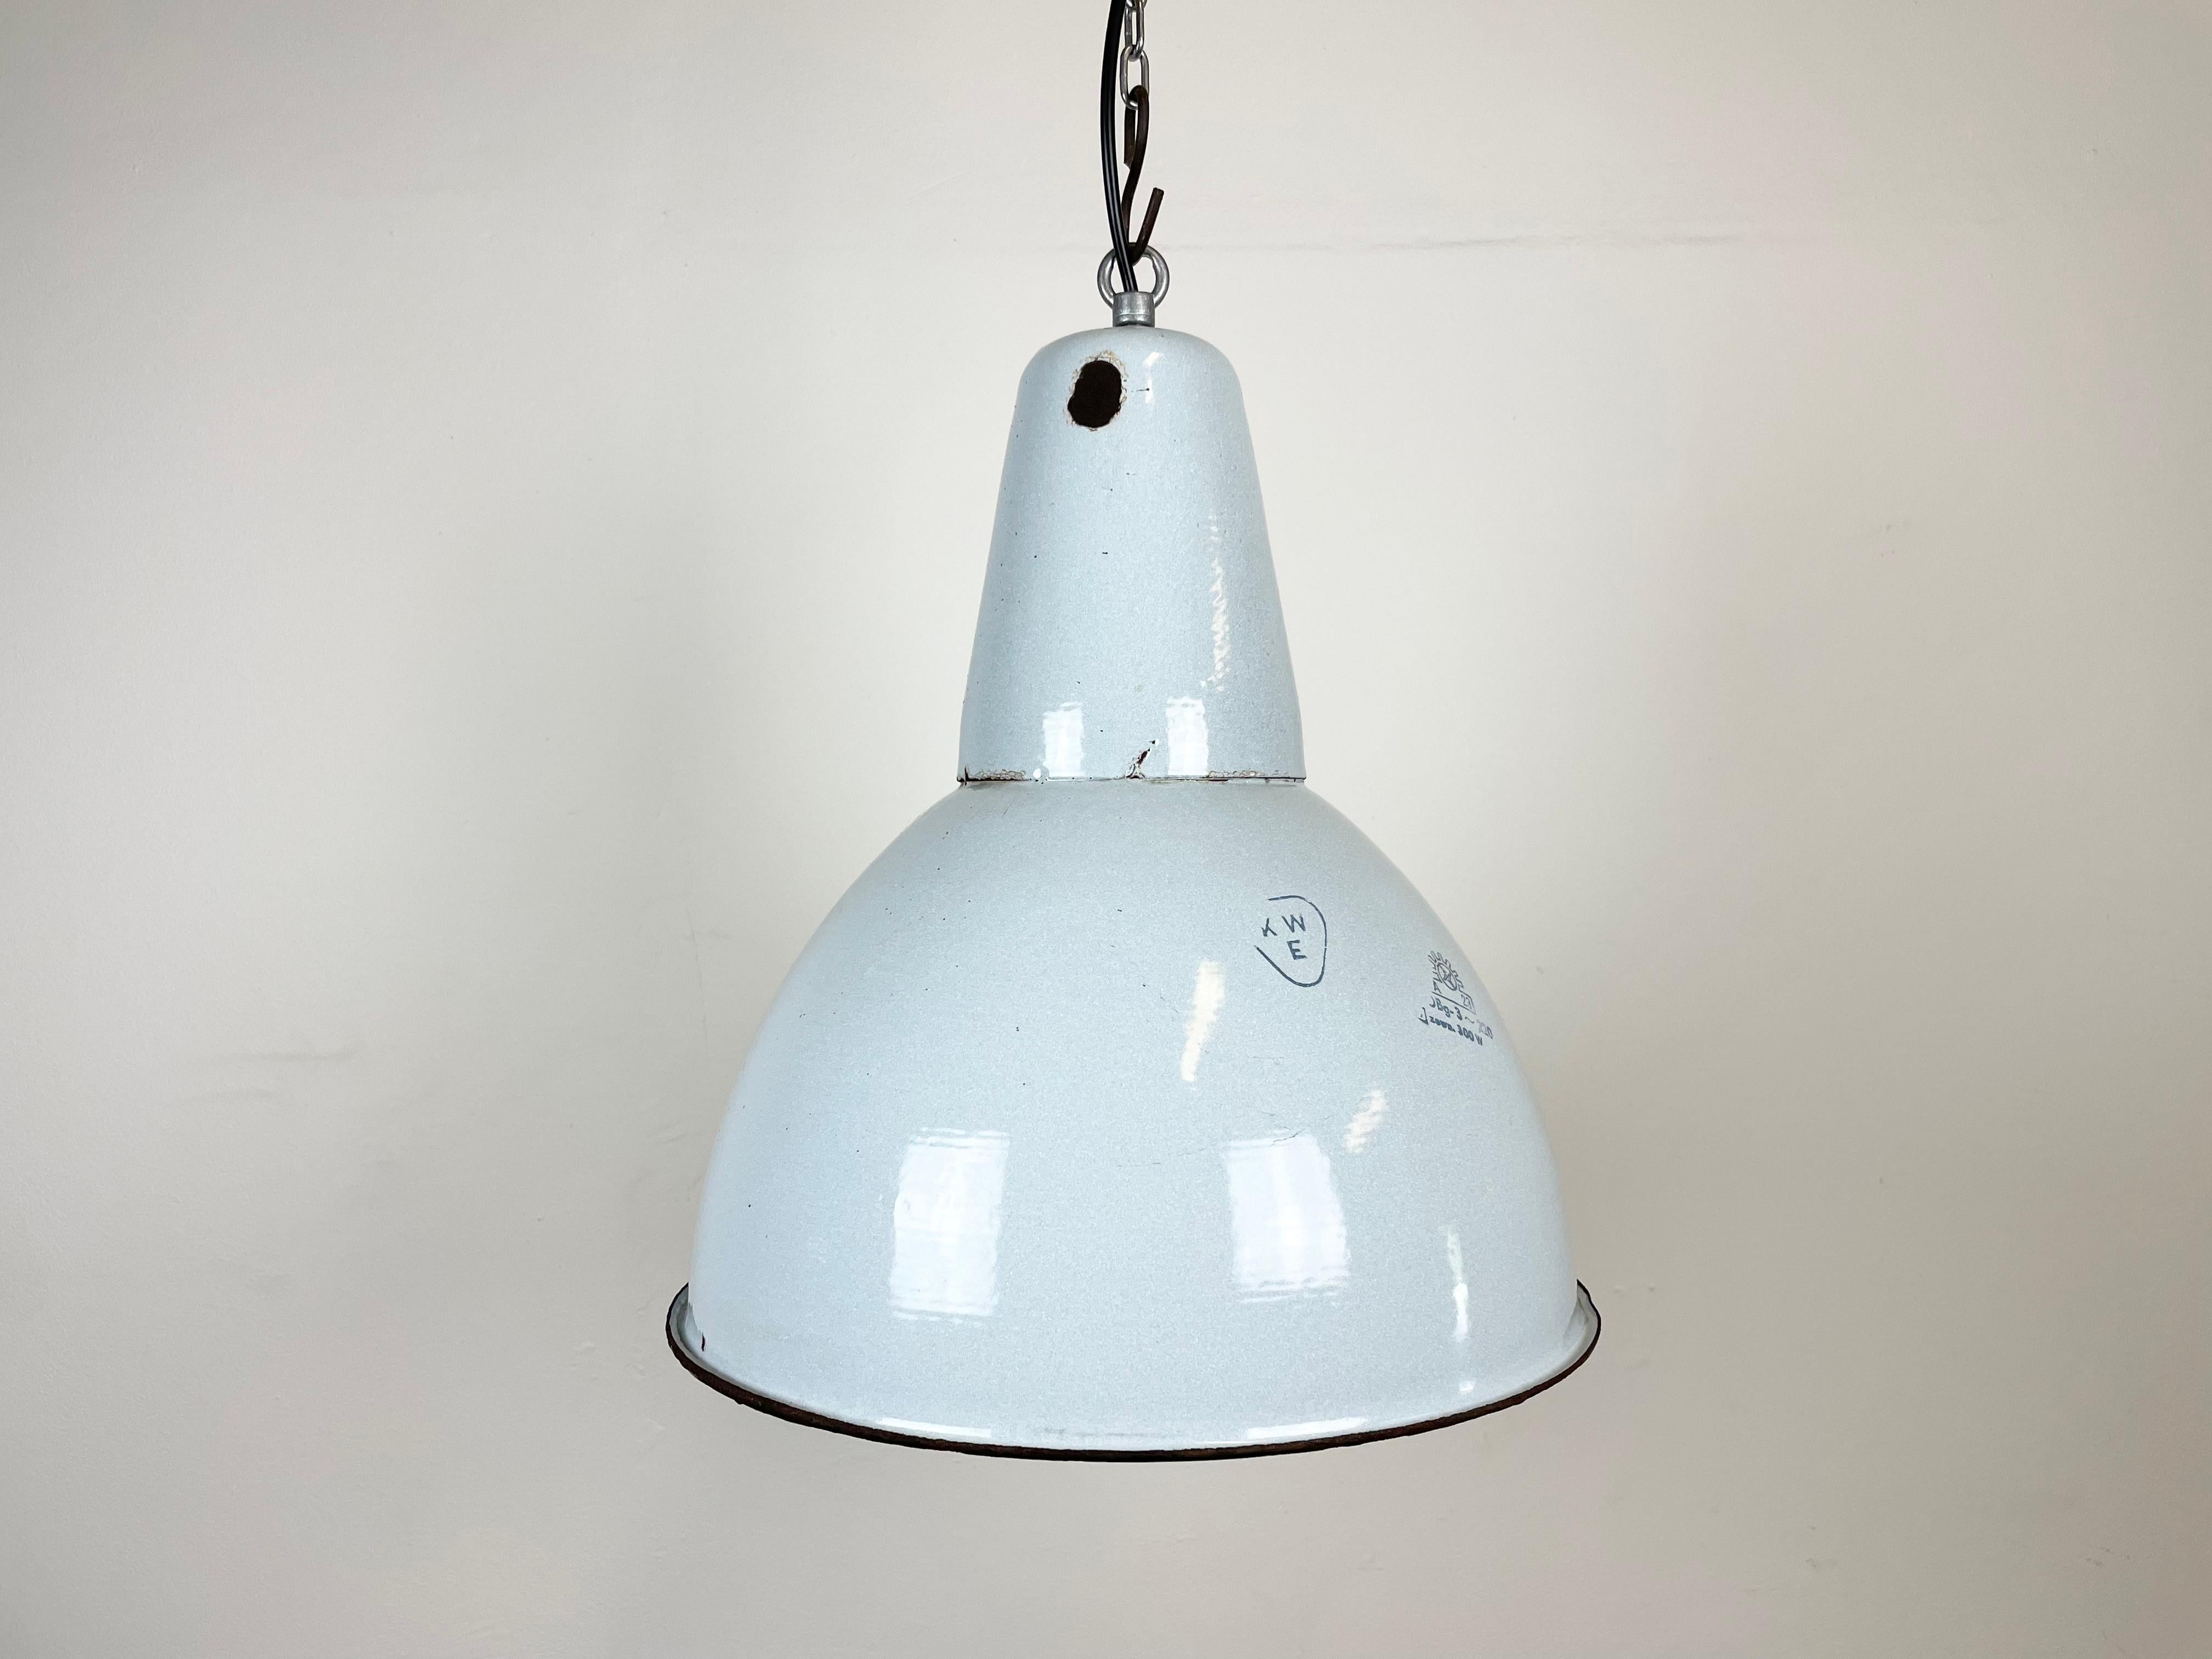 Industrial grey enamel pendant light made by Polam Wilkasy in Poland during the 1960s. White enamel inside the shade. Iron top. The porcelain socket requires E 27/ E26 light bulbs. New wire. Fully functional. The weight of the lamp is 1,6 kg.